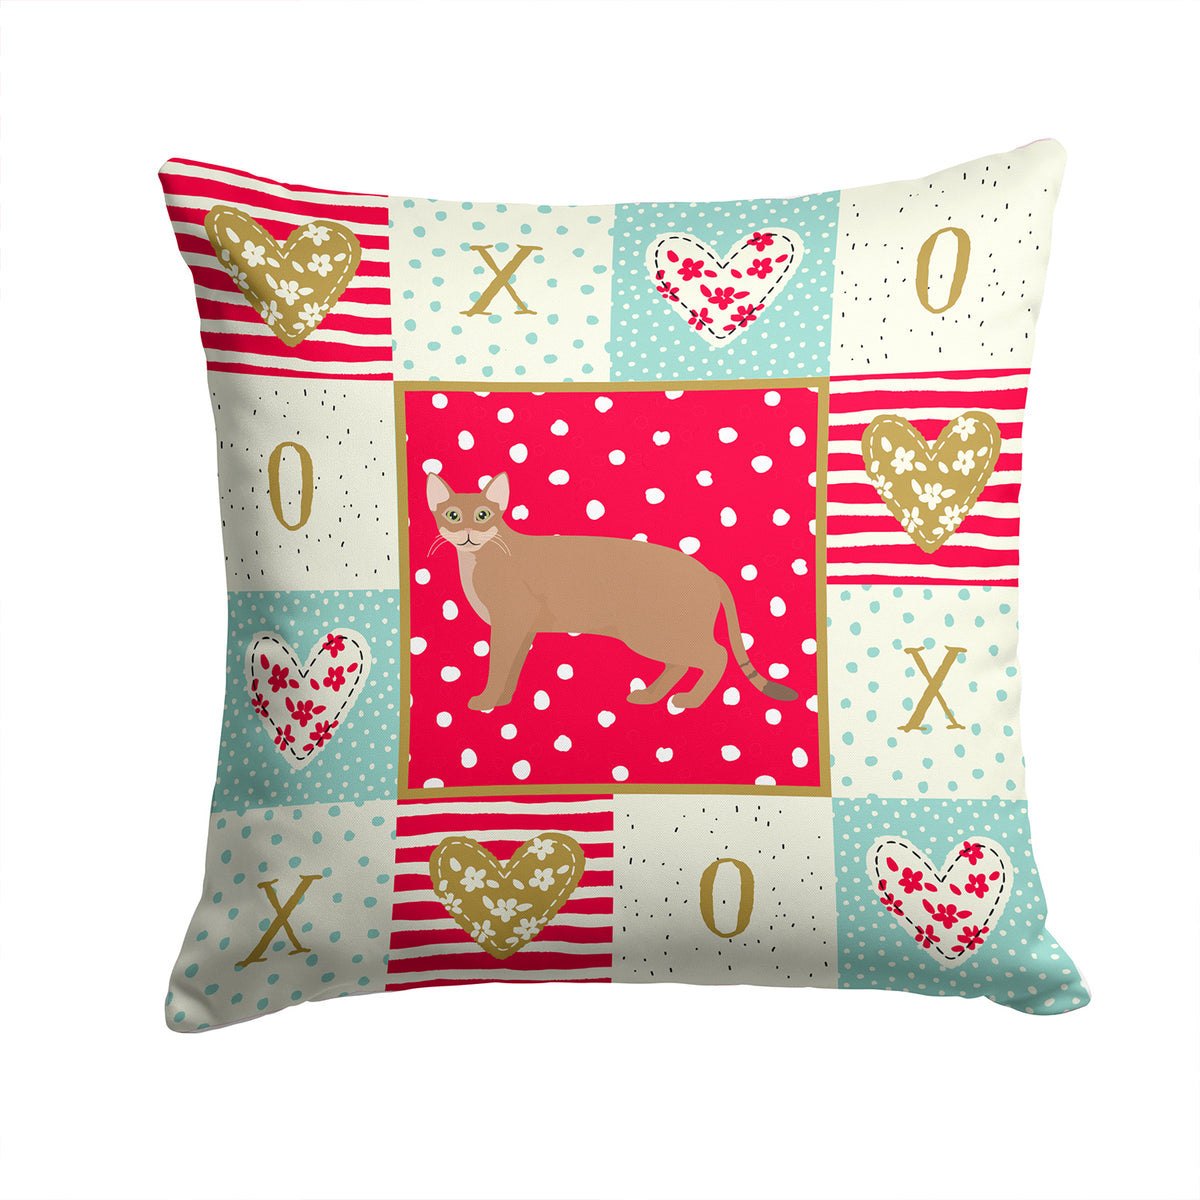 Chausie Cat Love Fabric Decorative Pillow CK5578PW1414 - the-store.com